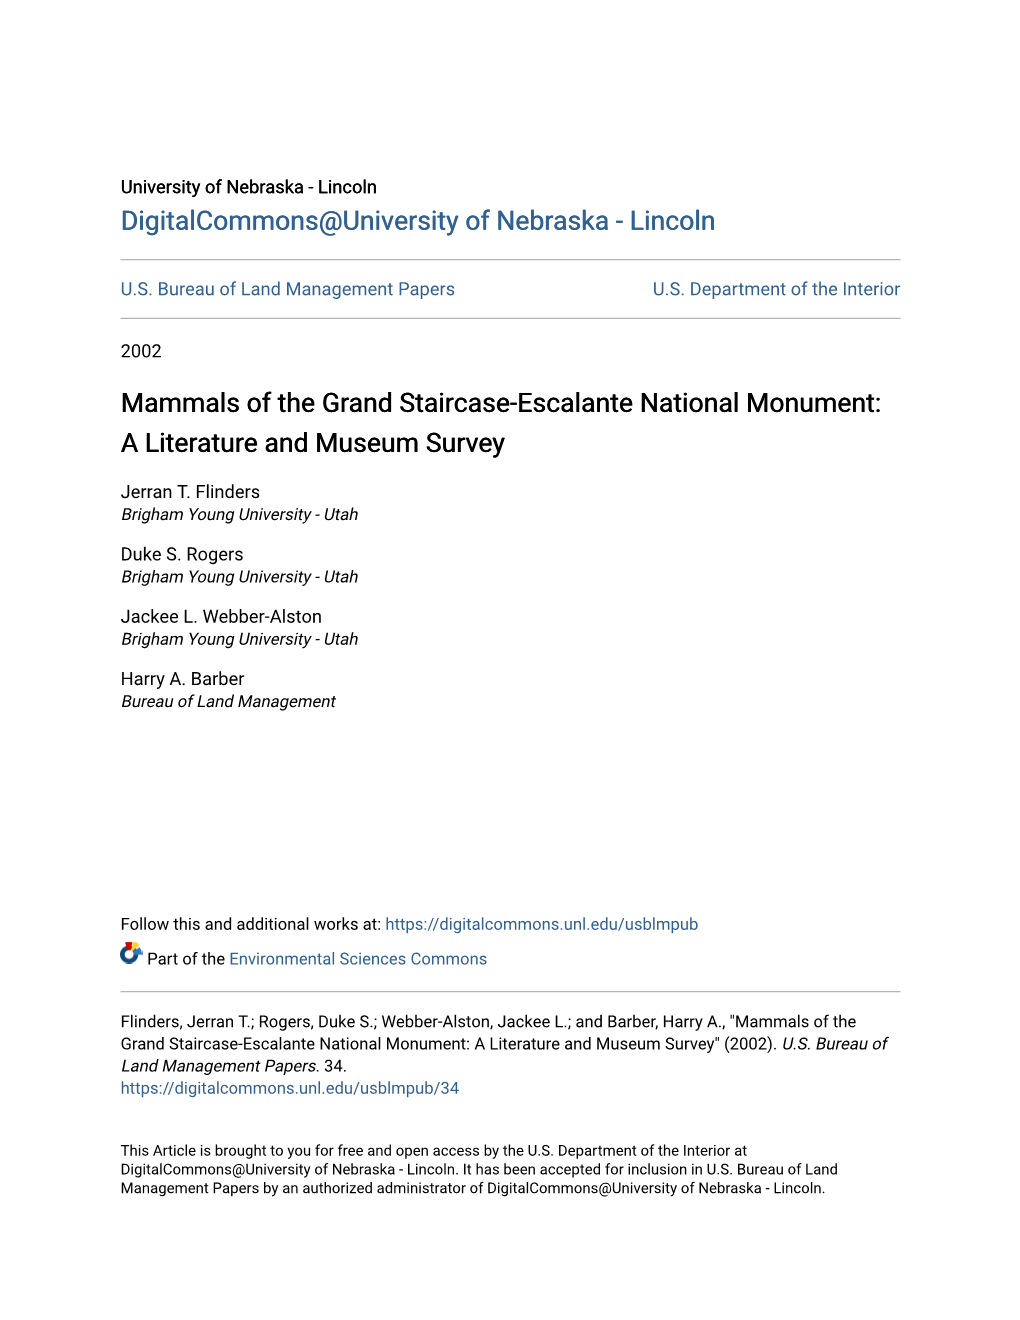 Mammals of the Grand Staircase-Escalante National Monument: a Literature and Museum Survey